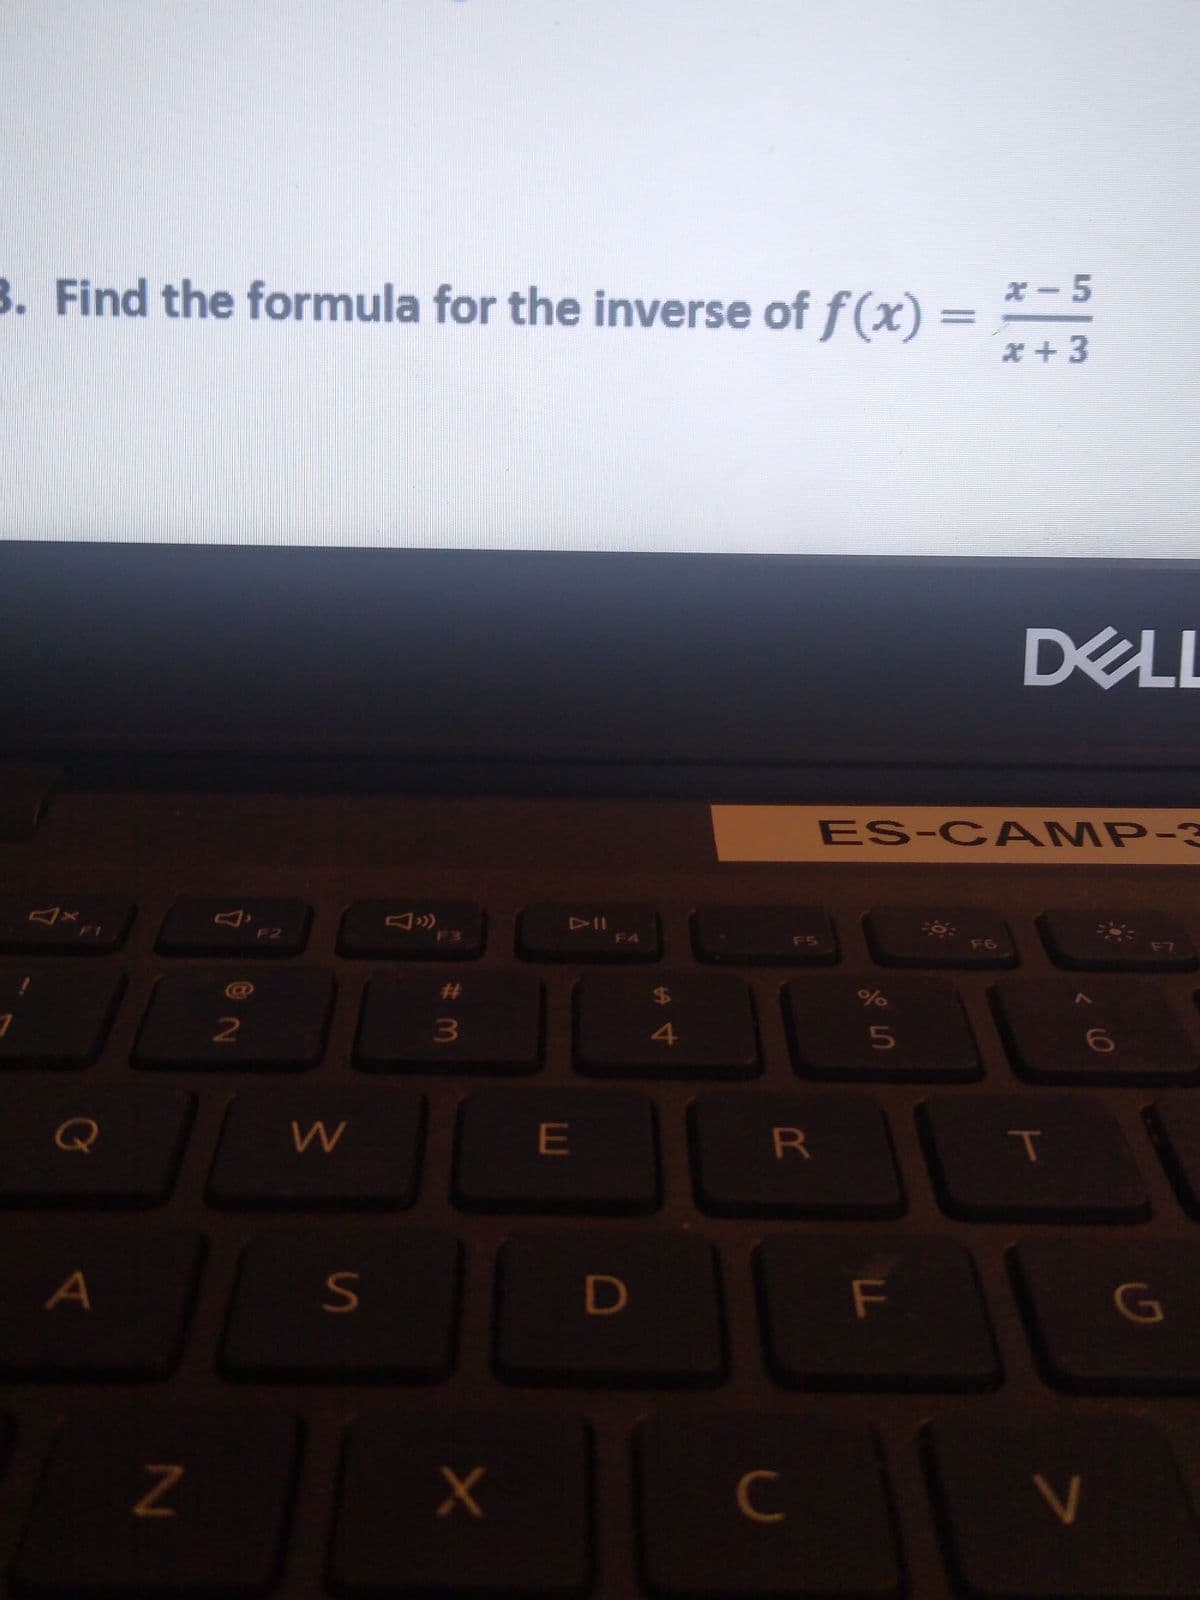 3. Find the formula for the inverse of f(x)% =
X-5
*+3
DELL
ES-CA MP-3
DII
F4
F1
F2
F3
FS
F6
F7
%23
24
3\
4
Q
E
R
A
D
F
G
C
